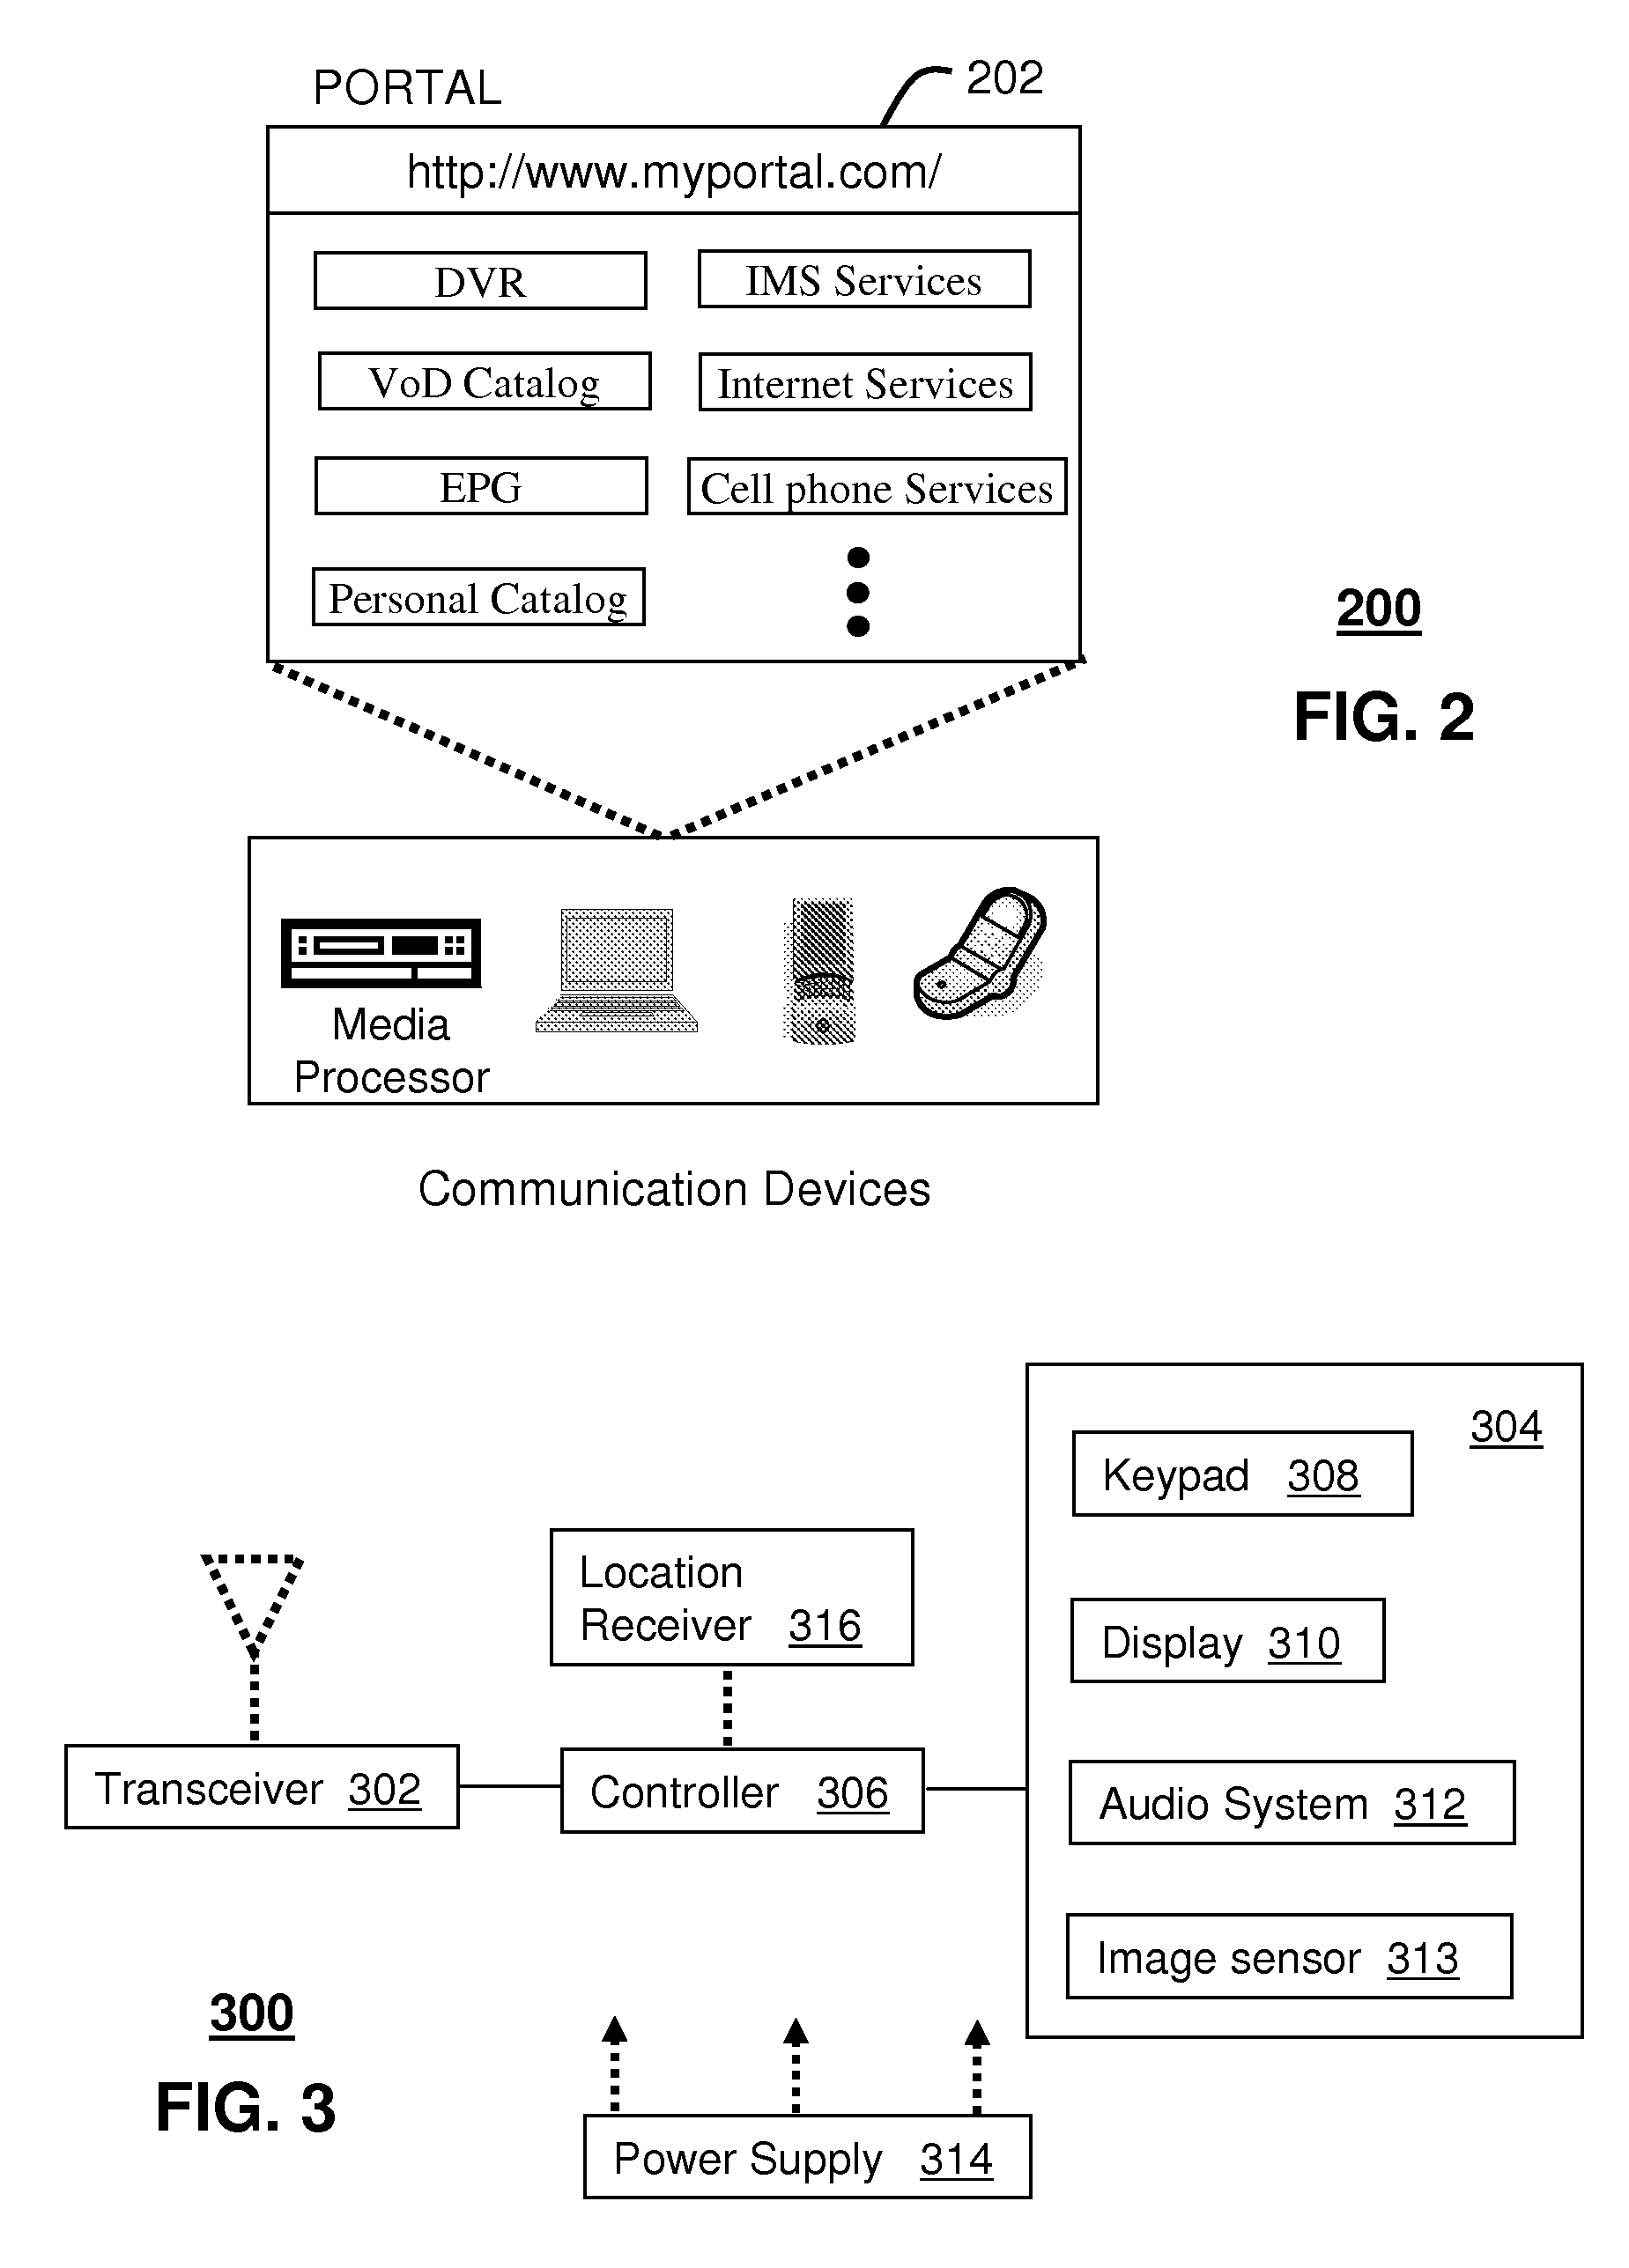 Method and appartus for model-based recovery of packet loss errors